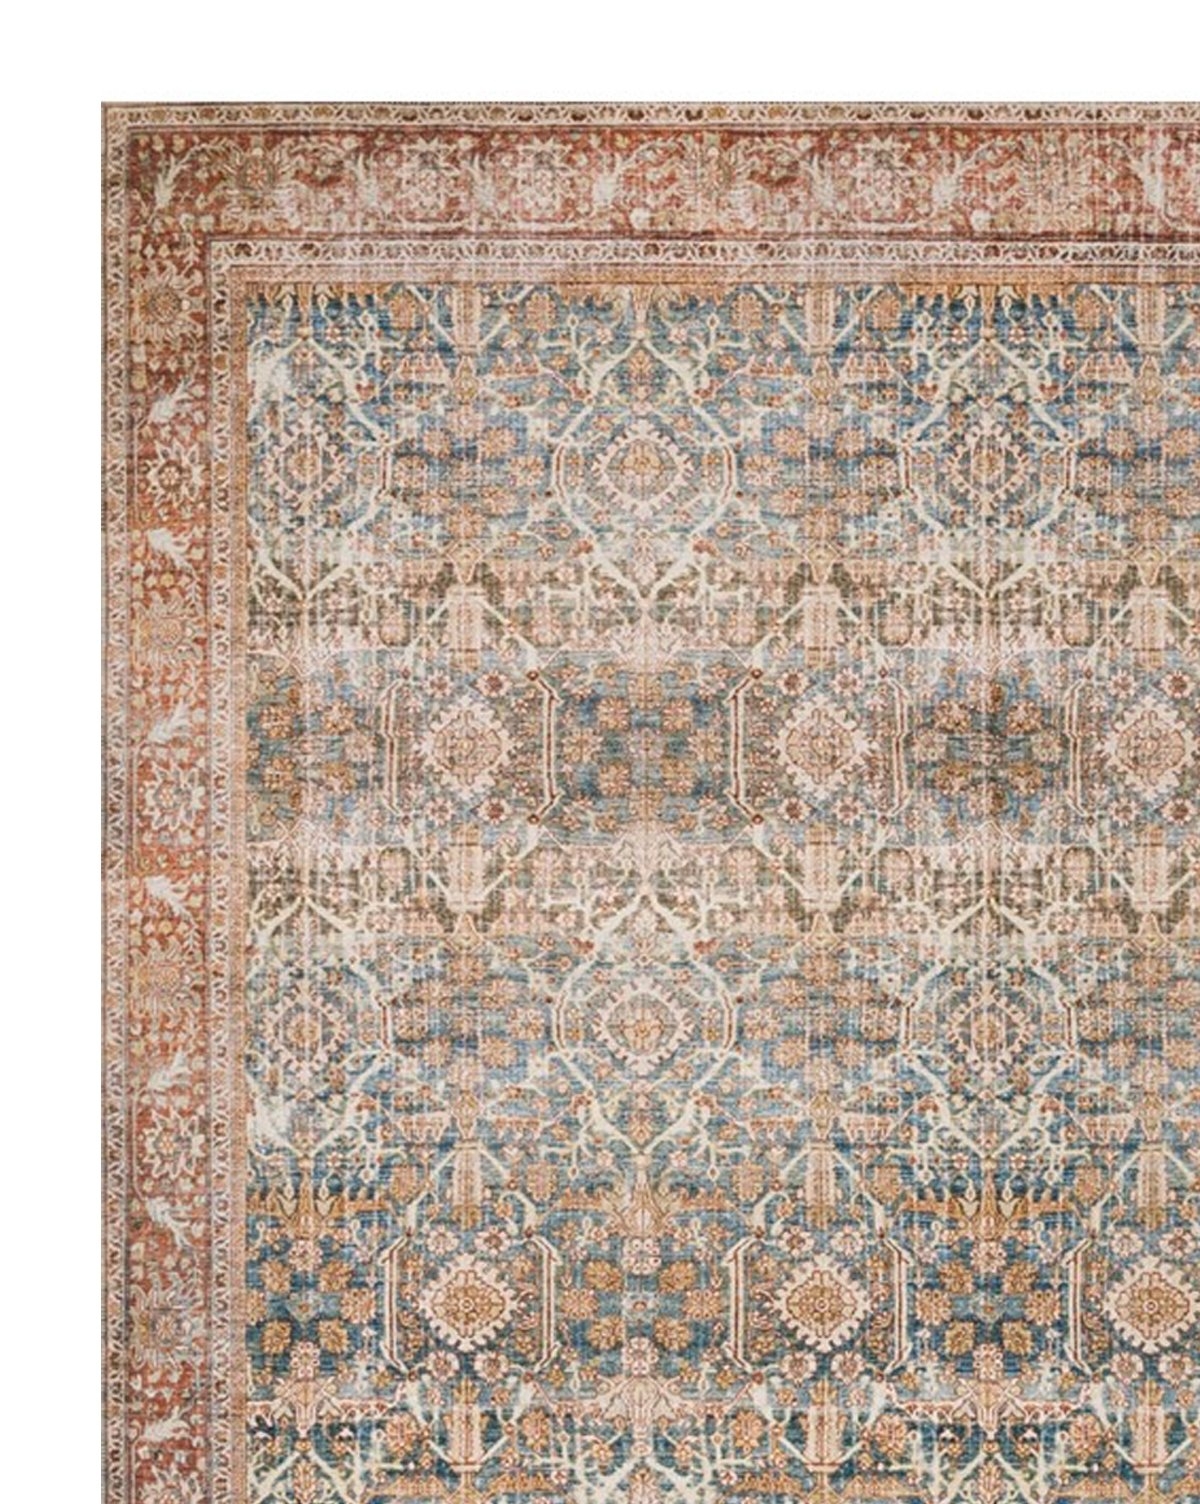 TUNIS PATTERNED RUG, 2'6" x 9'6" - Image 1